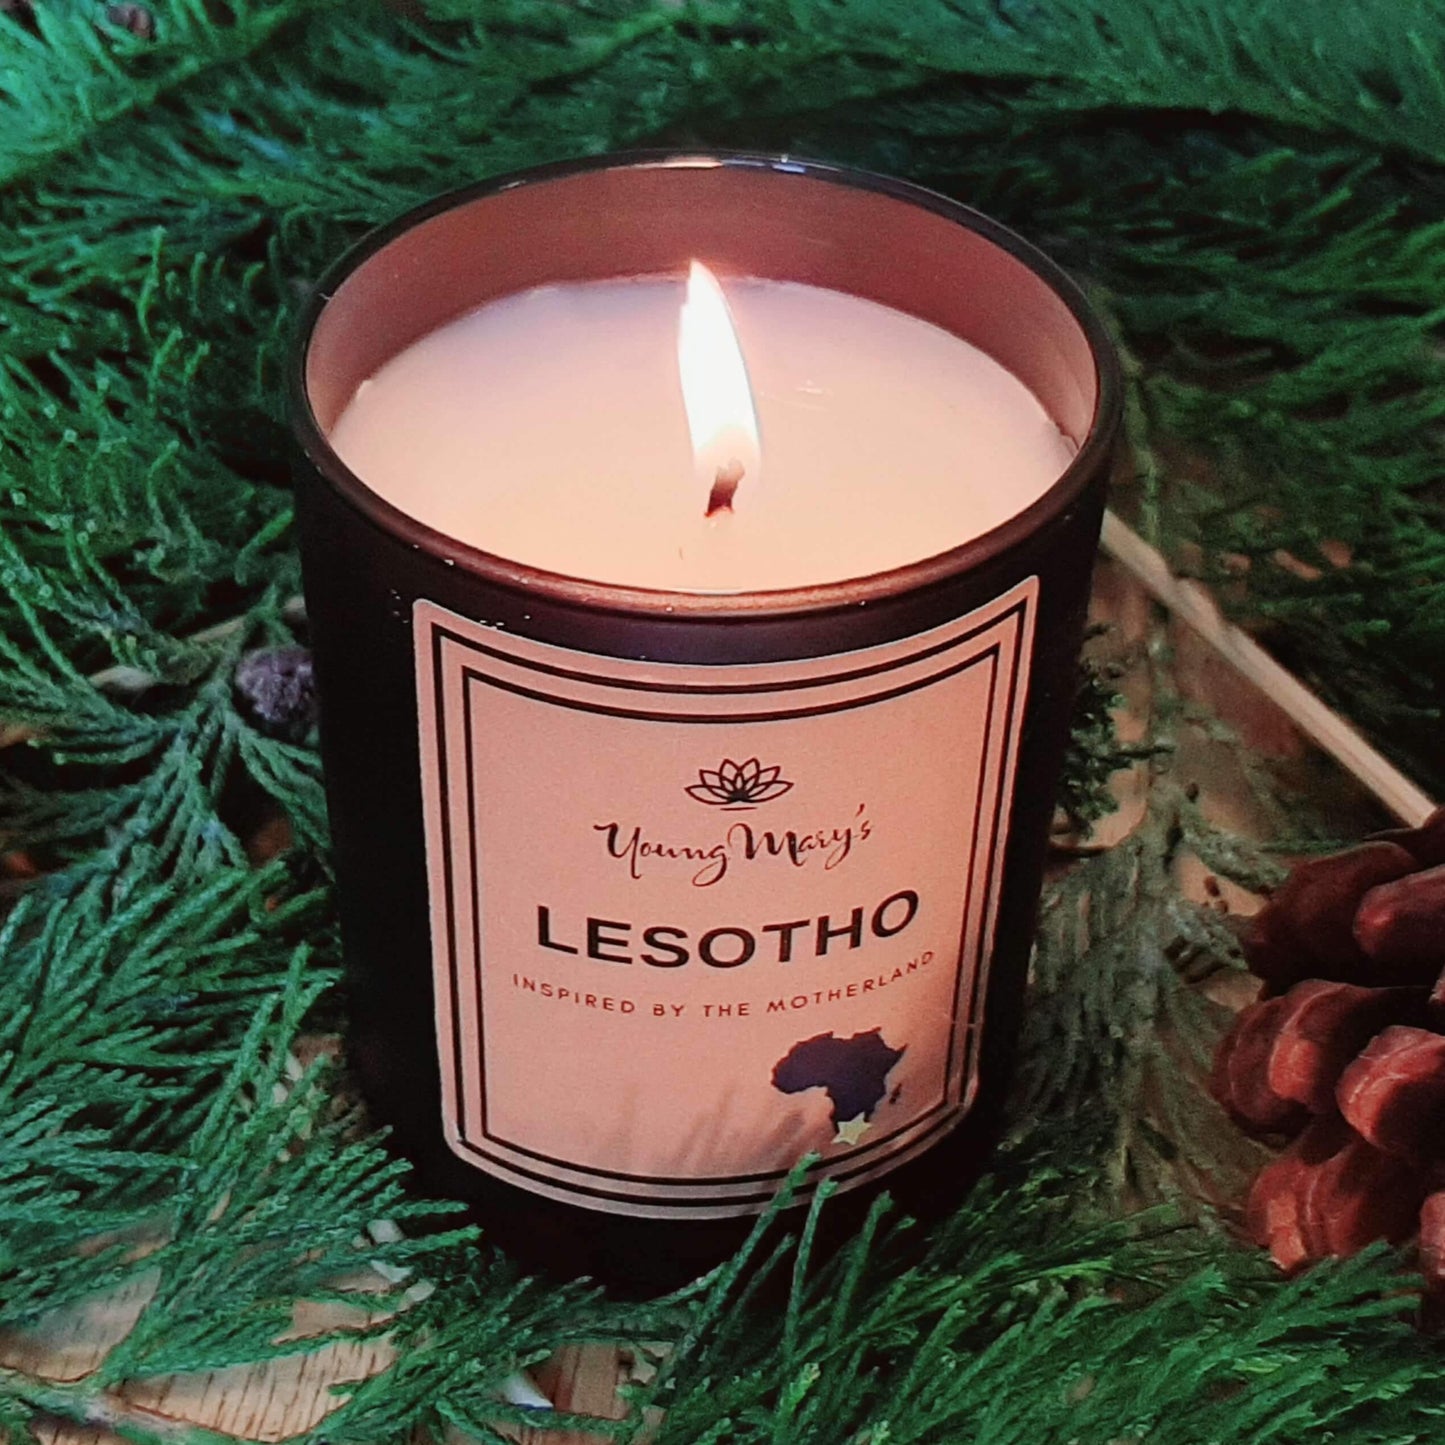 Young Mary's Candle Lesotho Candle (various sizes)